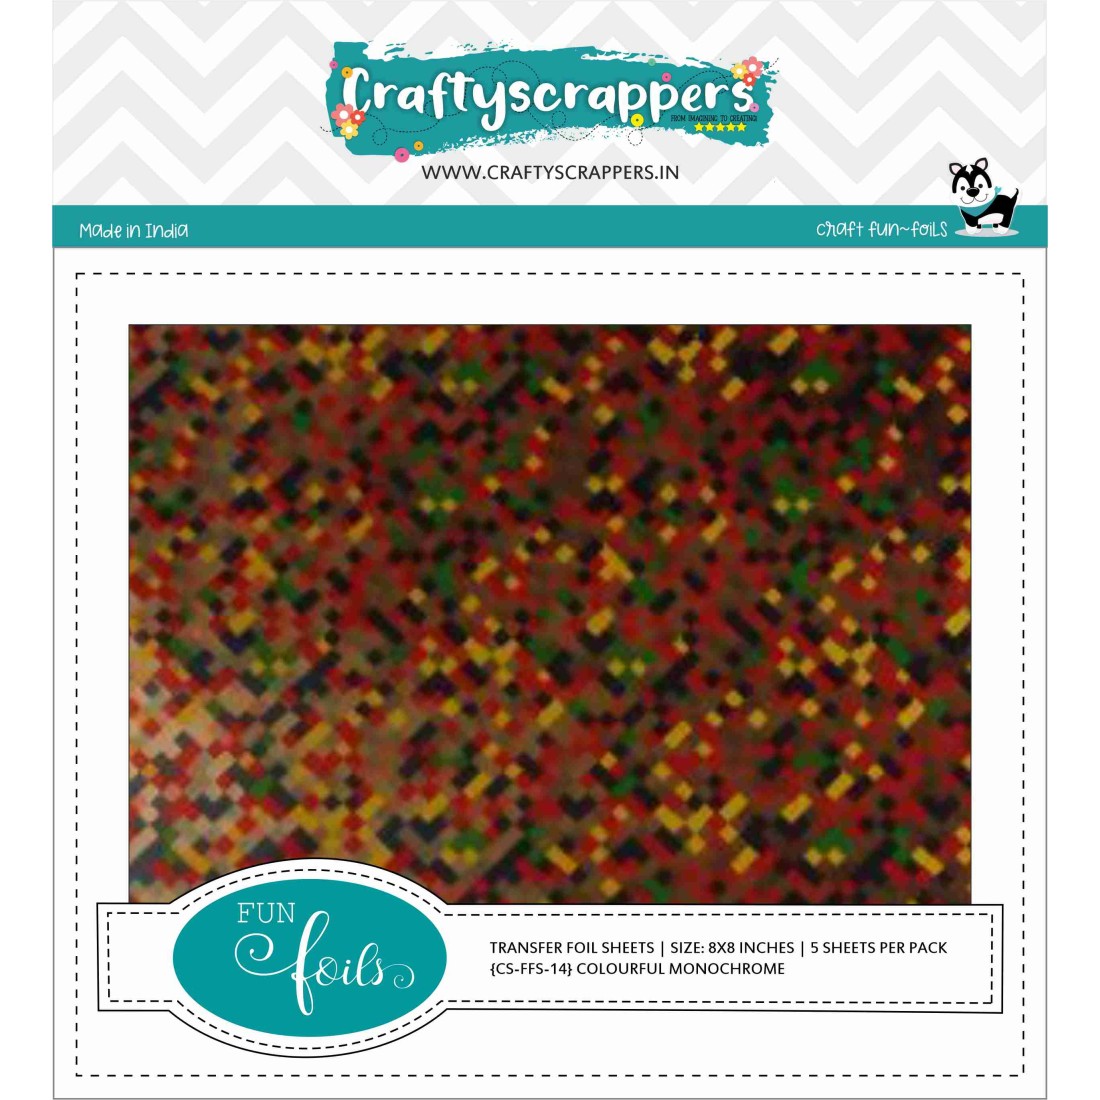 Craftyscrappers Funfoil- COLORFUL MONOCHROME